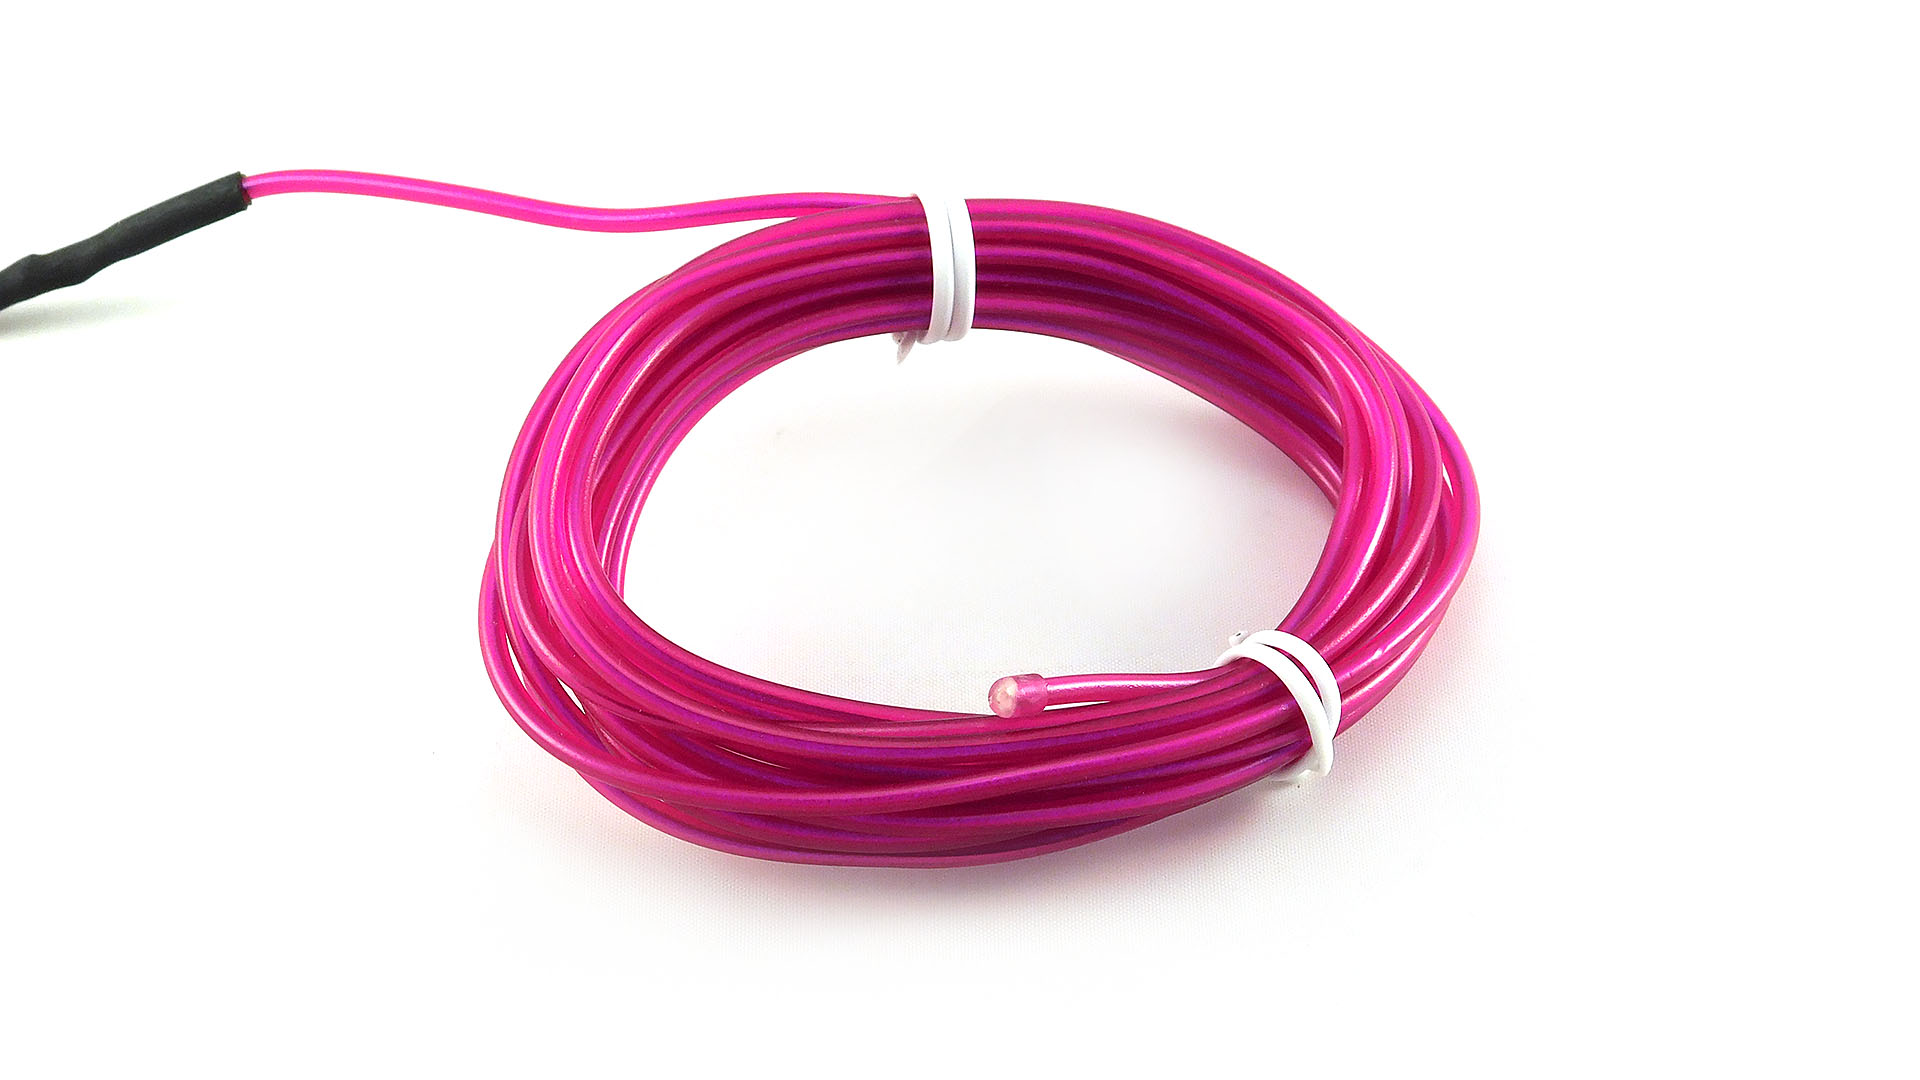 ELWIRA Soft El Wire 2.3 mm x 3m, with connector, purple